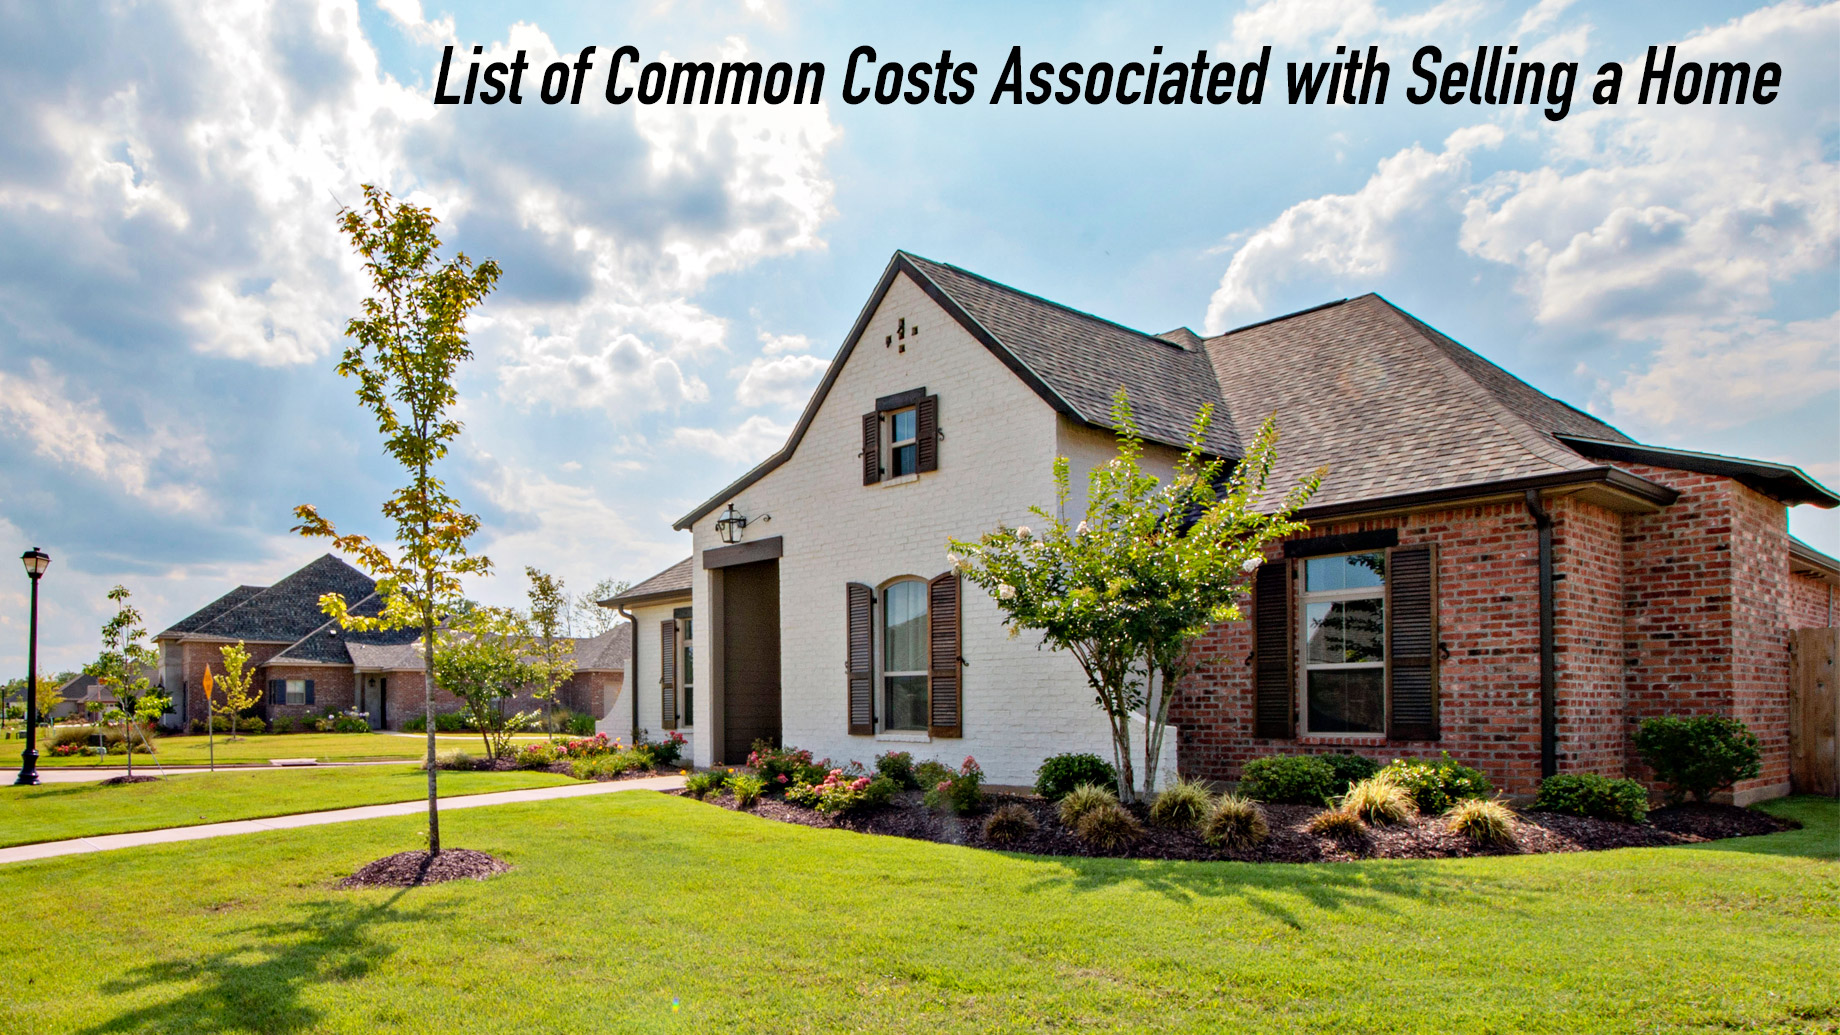 List of Common Costs Associated with Selling a Home